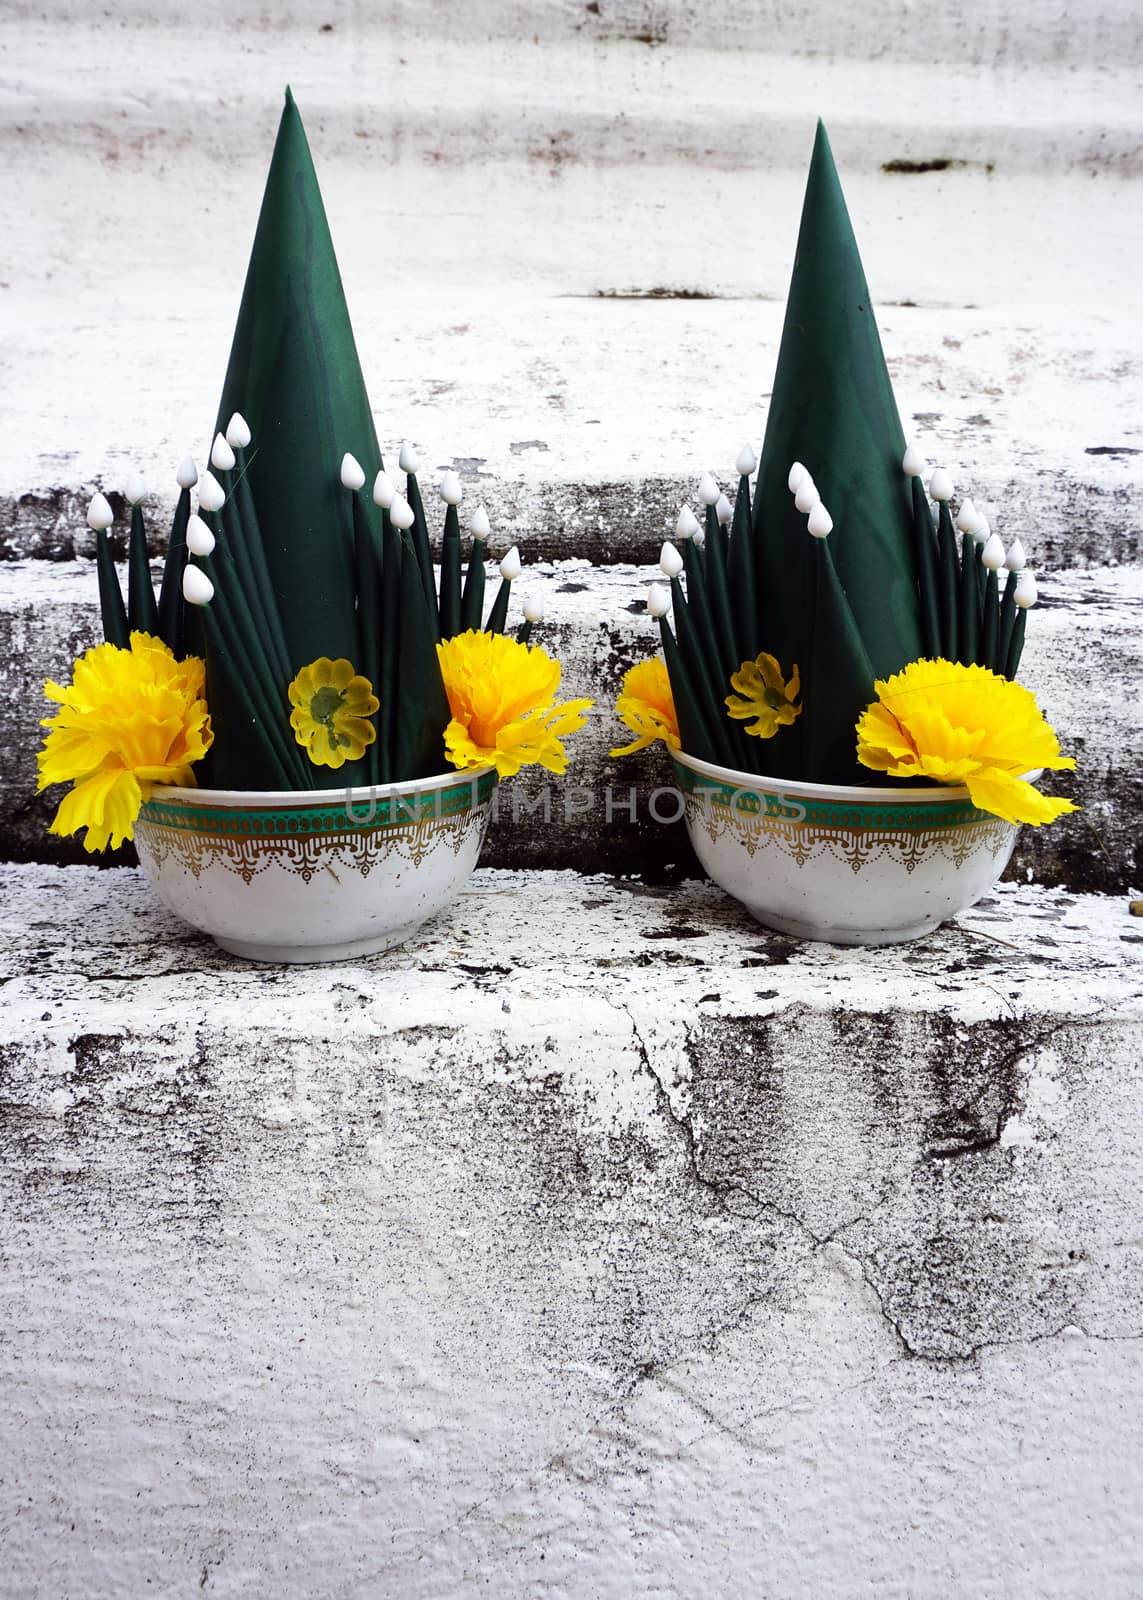 Pair of Art of banana leaf and flower buddhism, culture of thailand, ceremony bai sri